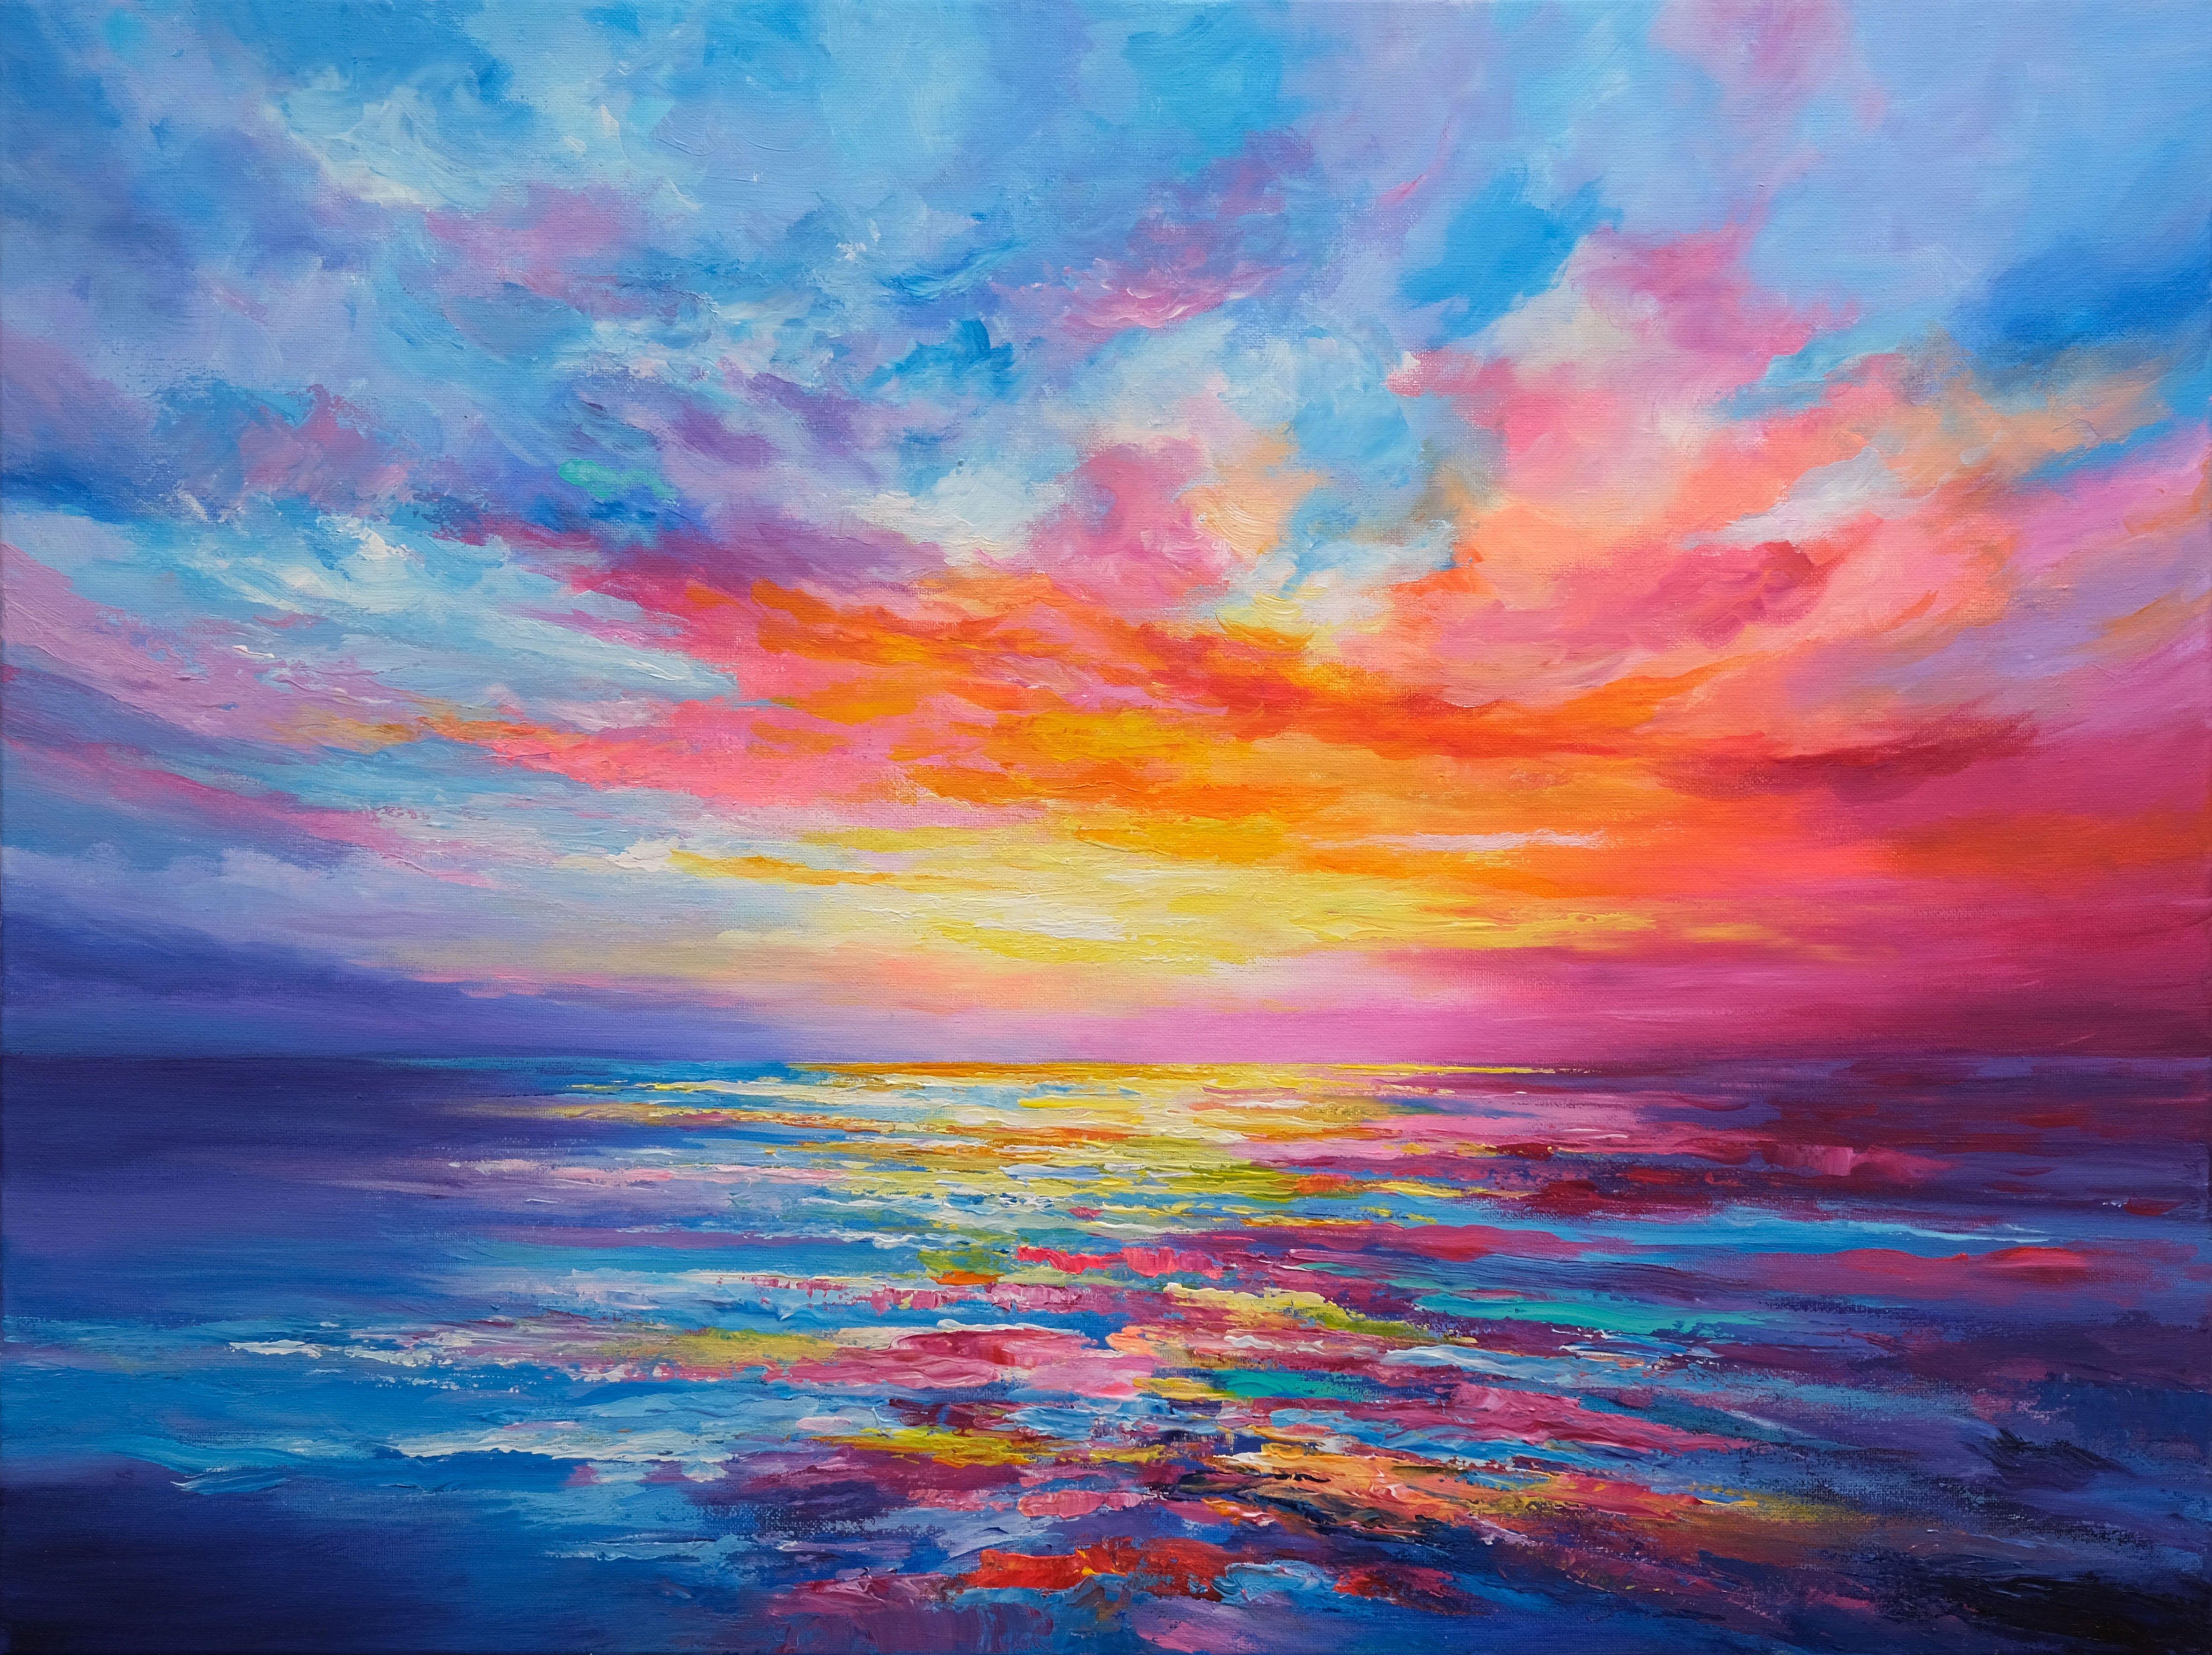 A dream sunrise with vibrant colors.  An original painting that expresses a fantasy seascape and colorful sunrise.  It was painted in multiple layers with palette knife and brushes.    * The artwork is signed on the back and includes a Certificate